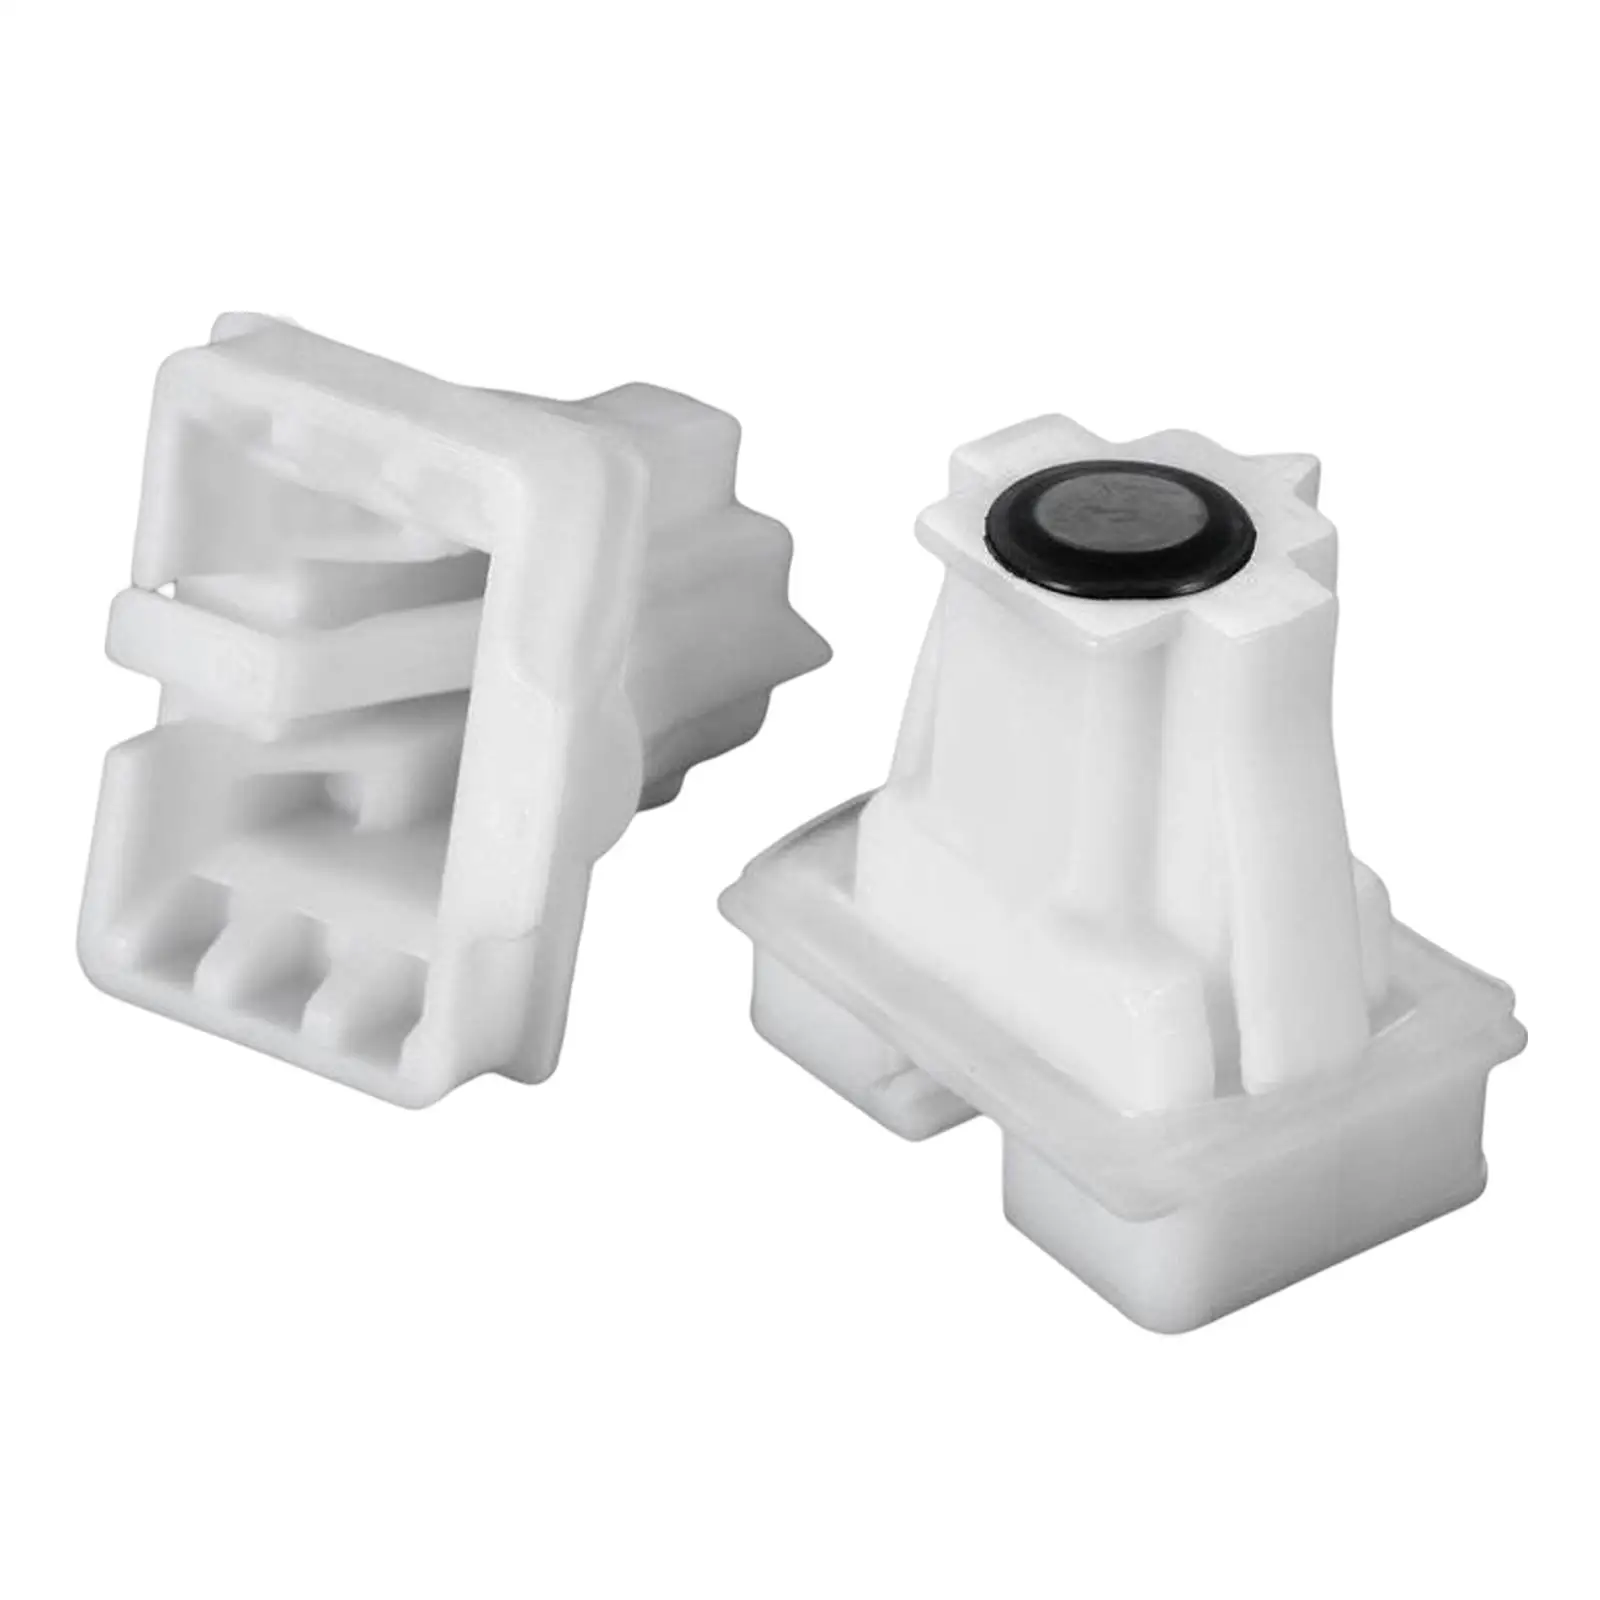 2x Vehicle Rear Seat Cushion Pad Clips 1609267180 White for Citroen C-Elysee C3